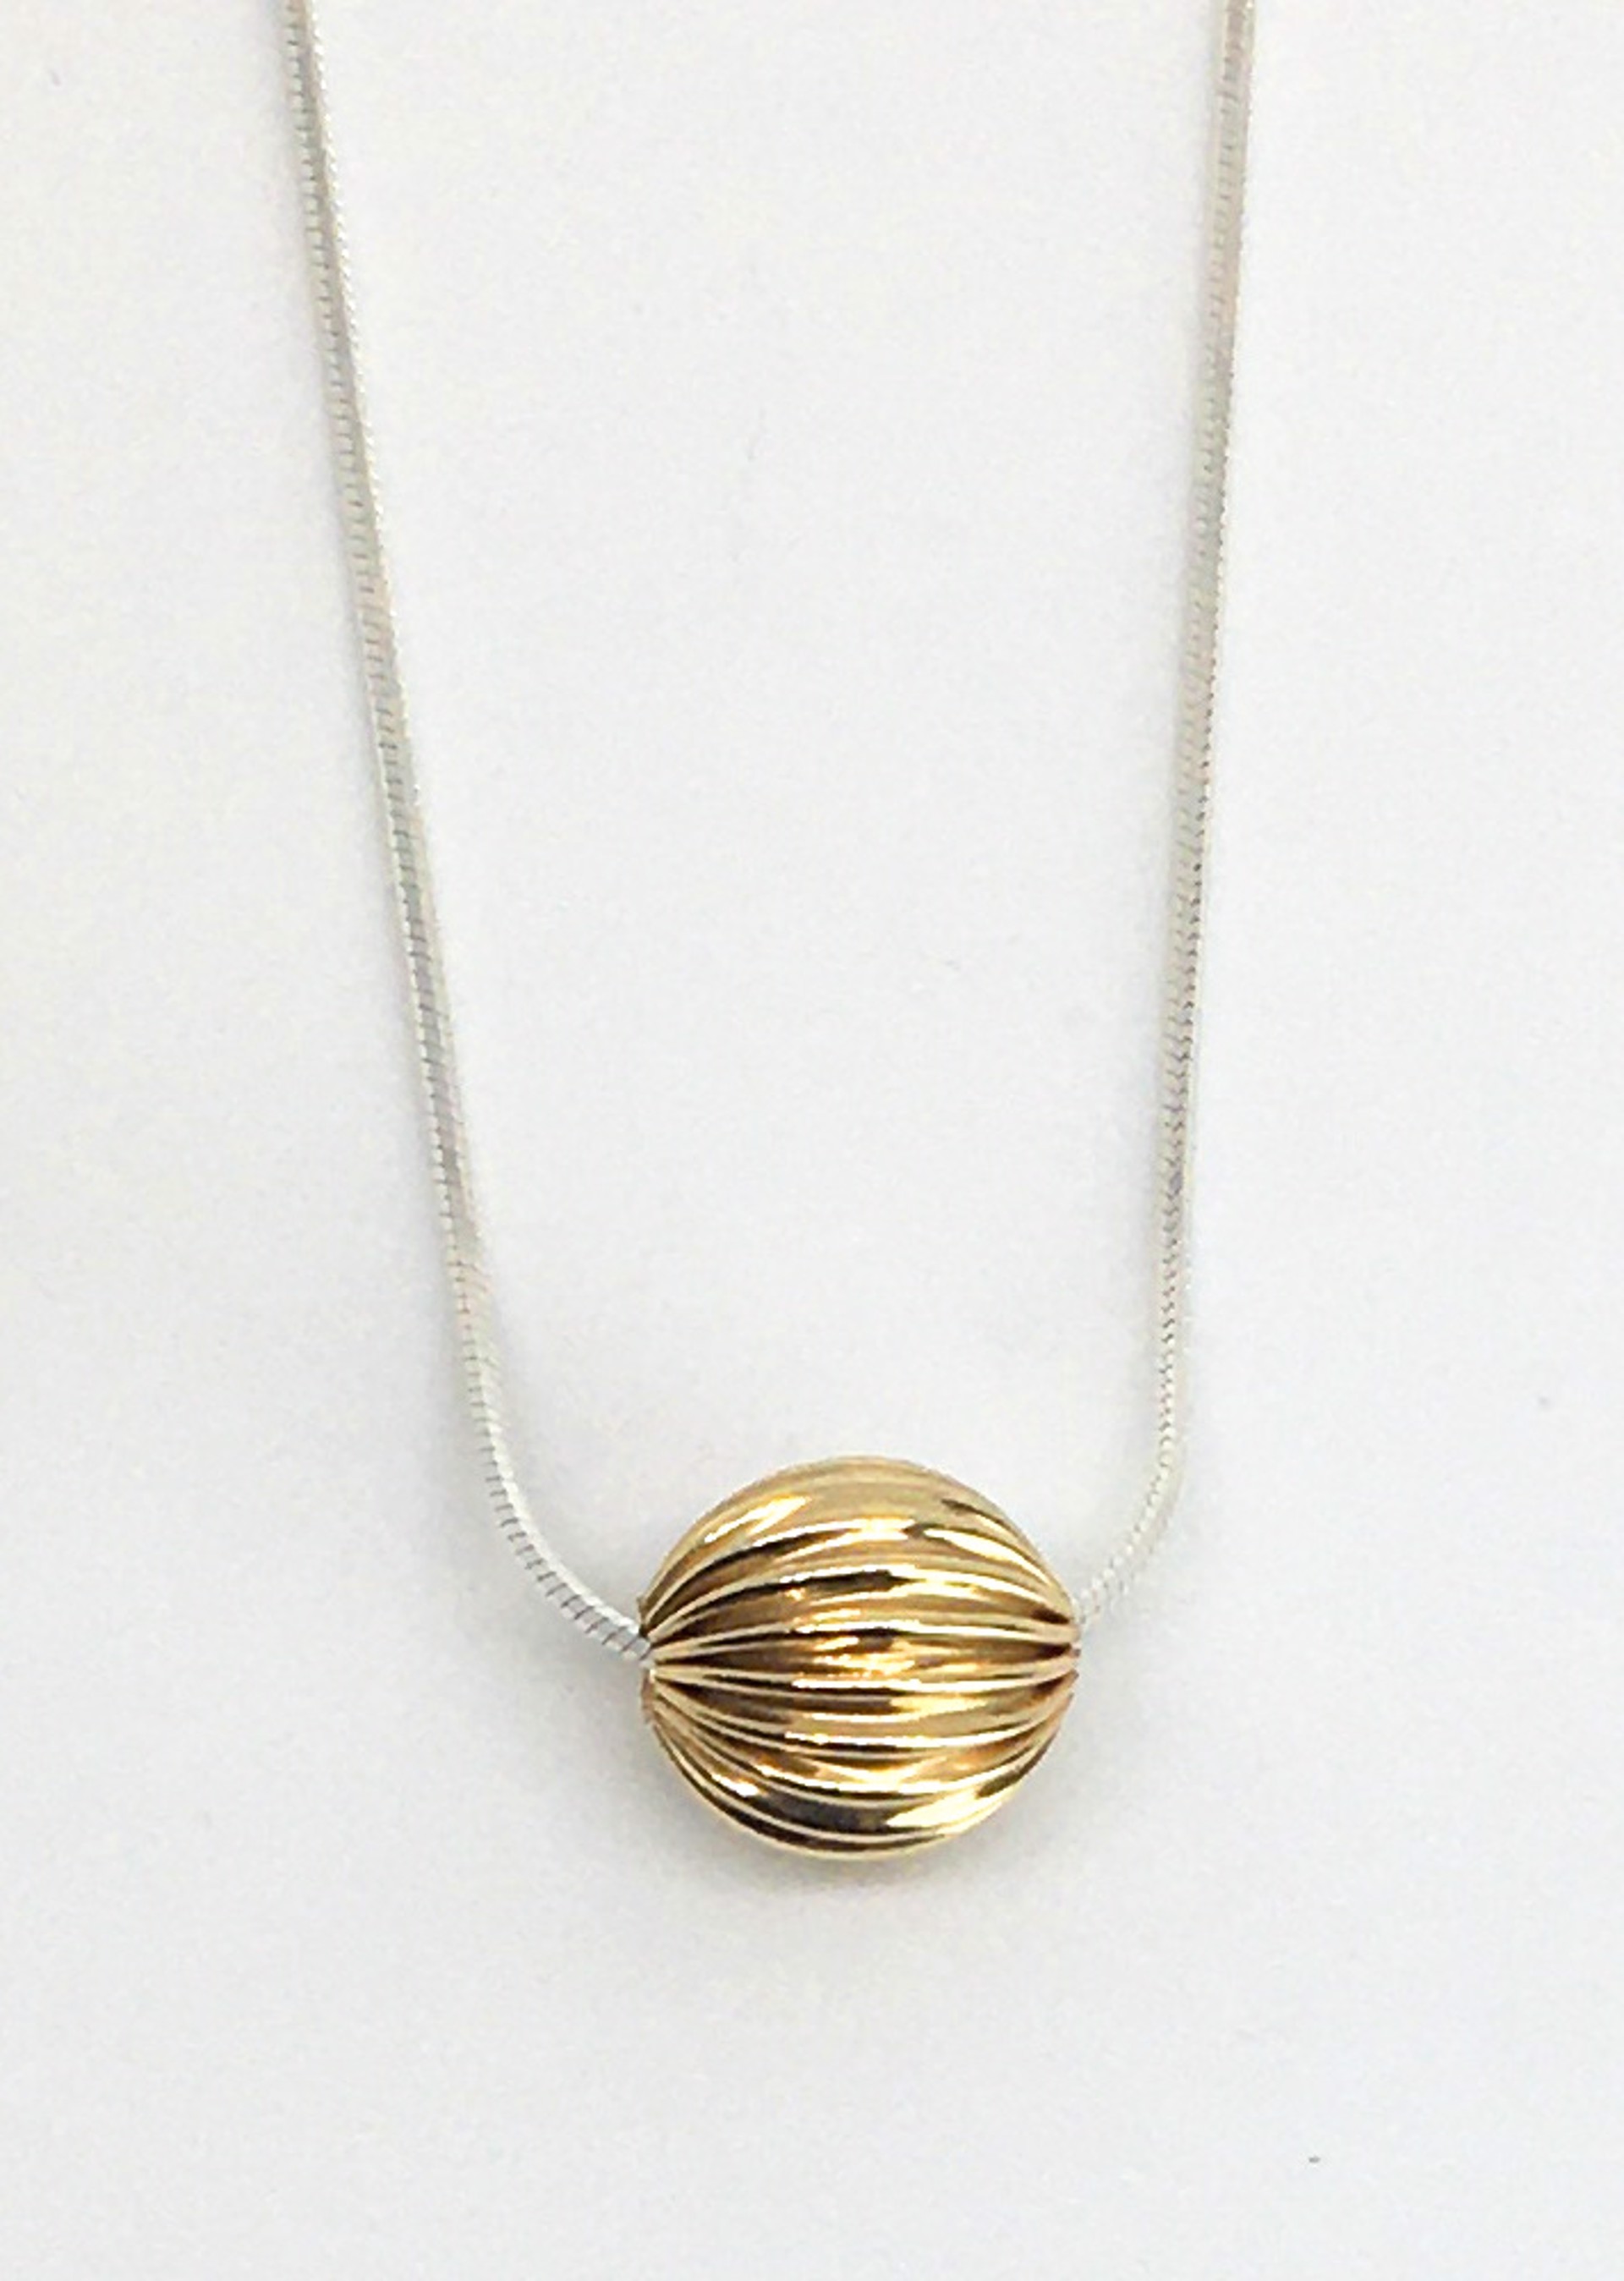 18" Eunity Necklace With Textured Gold Bead by Suzanne Woodworth